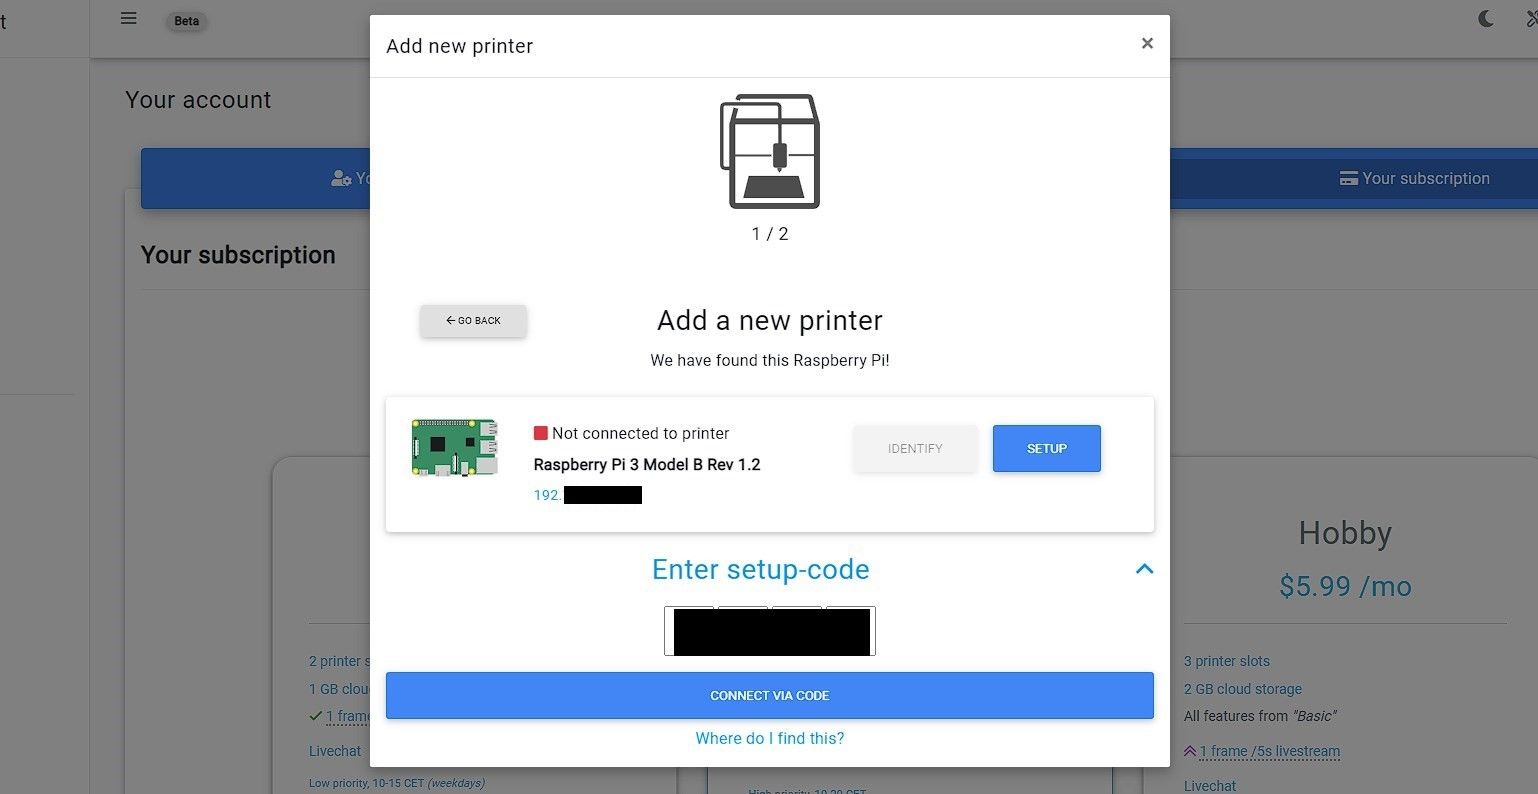 enter the 4-digit code to connect your 3d printer octoprint server to simplyprint